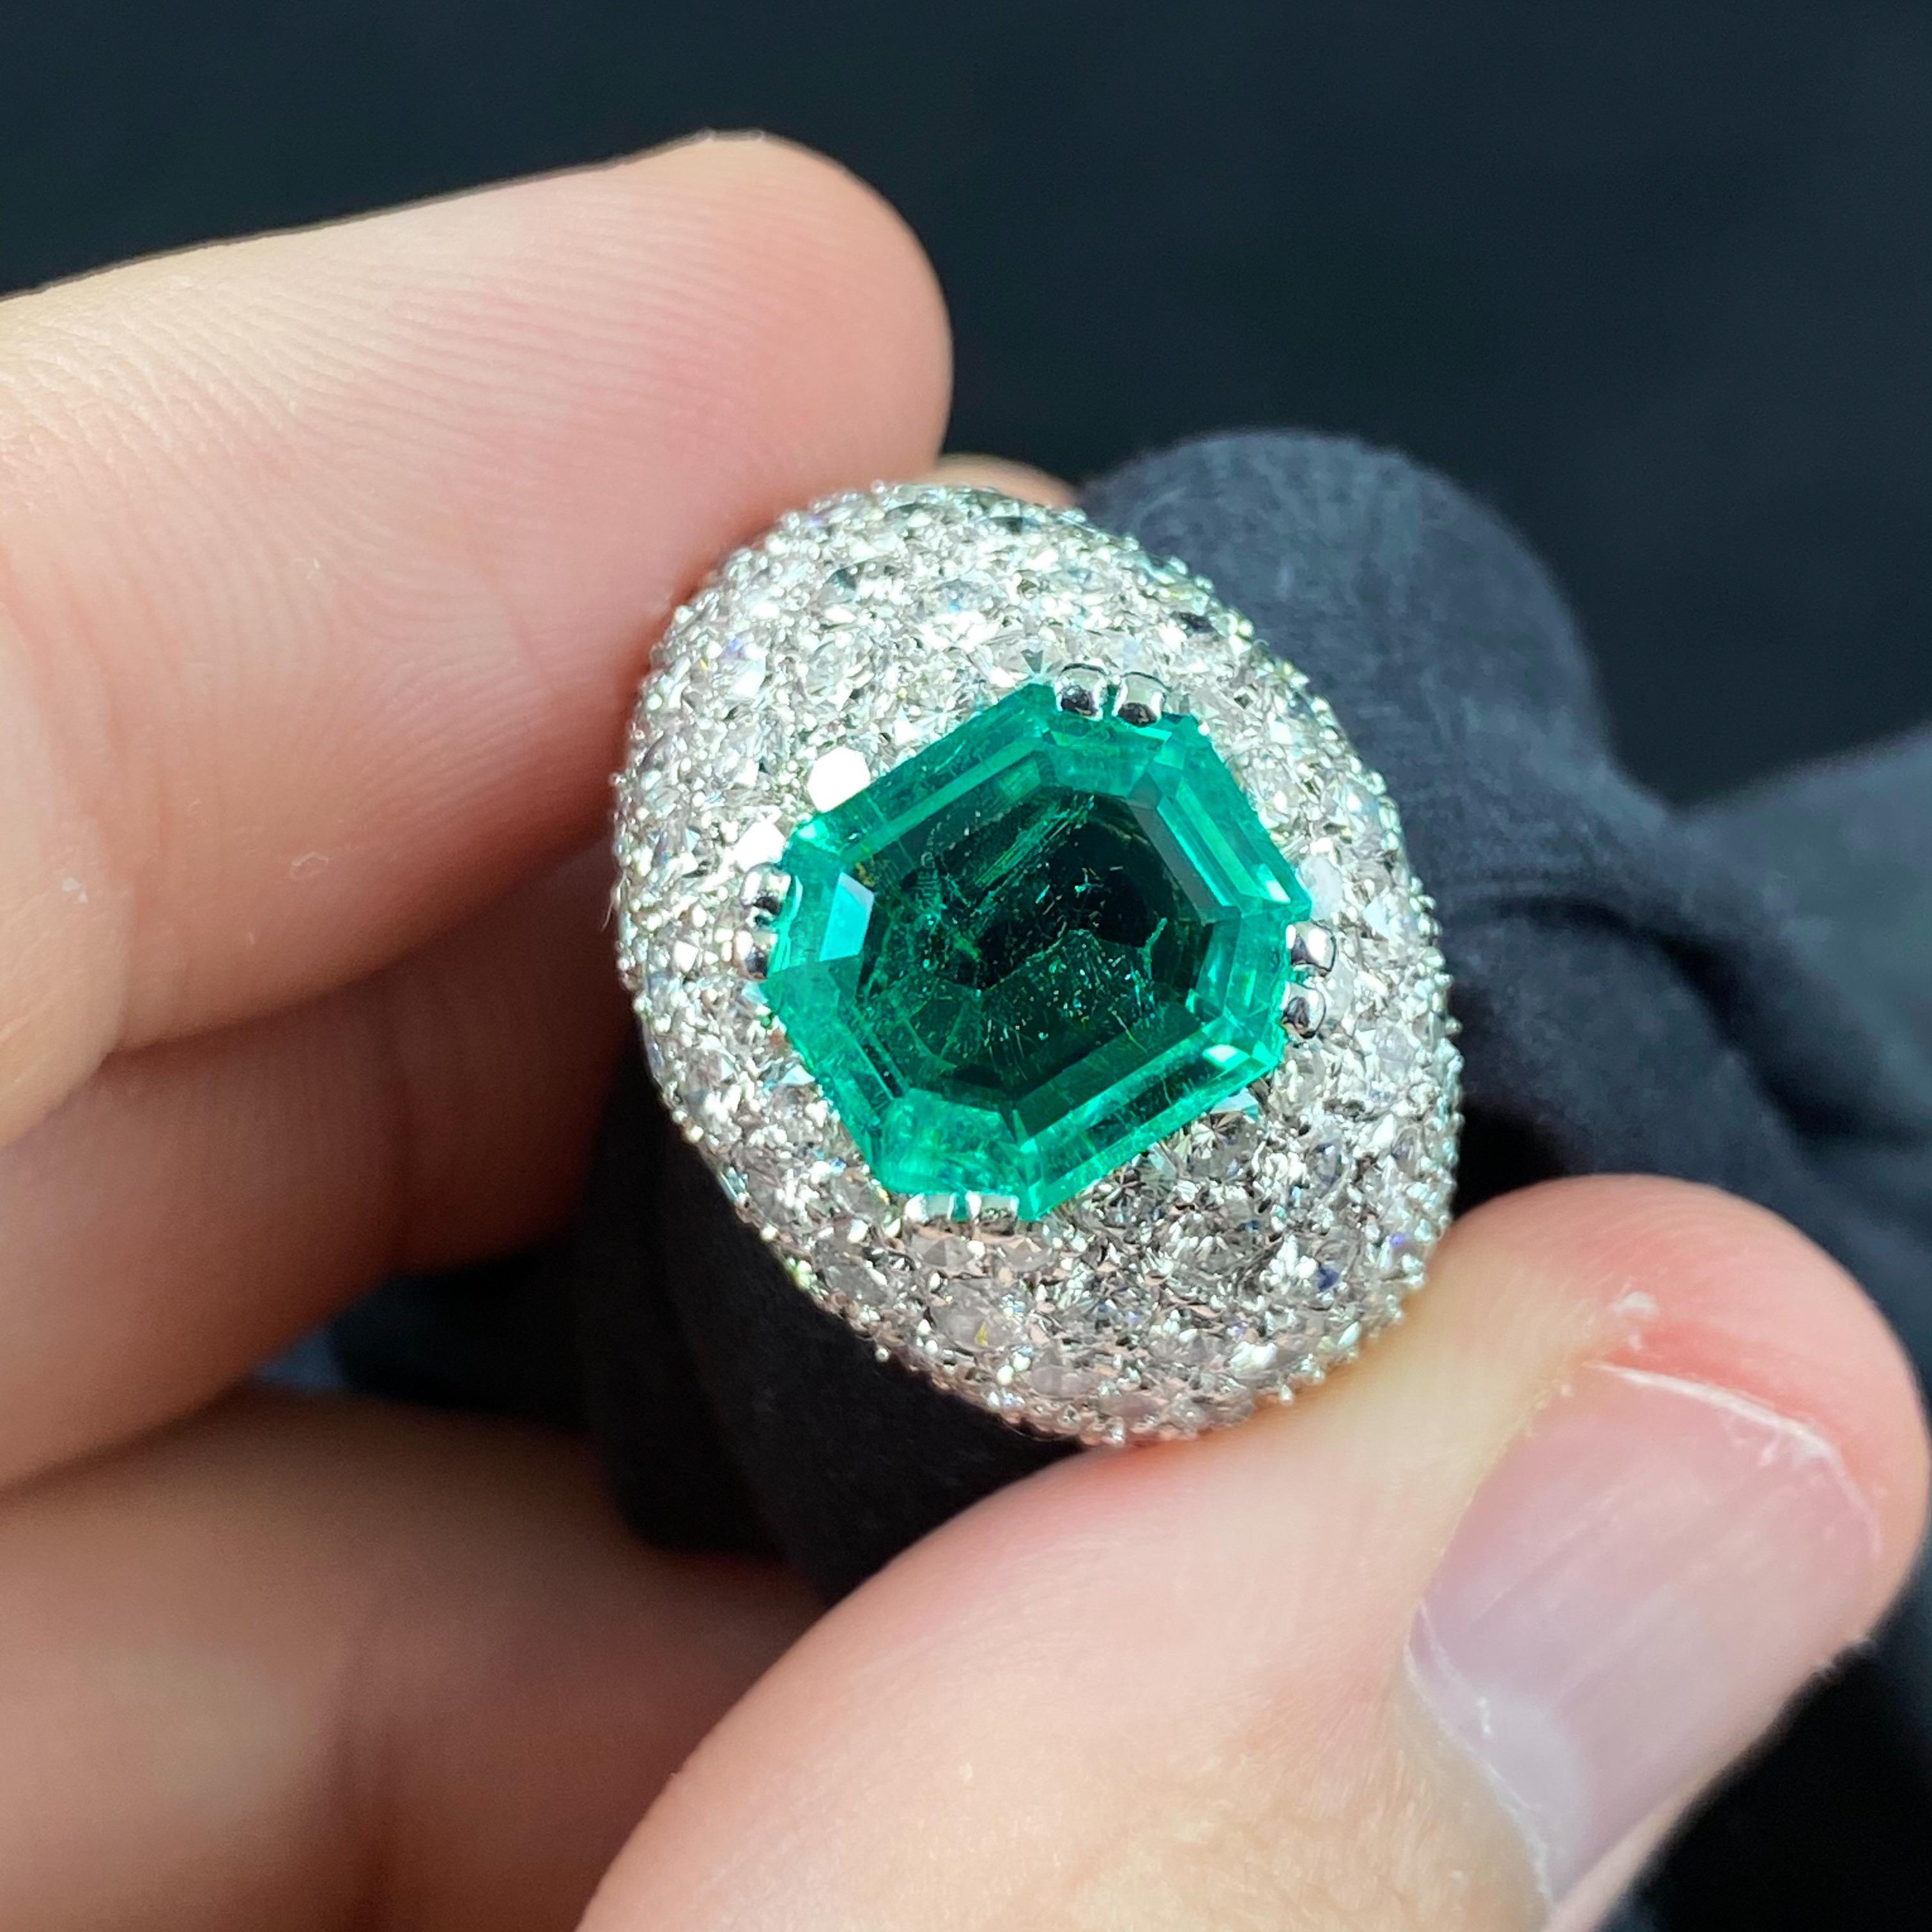 Vintage 1960s/1970s Colombian Emerald and Diamond Bombe Cocktail or Dress Ring in Platinum, Signed, Portugal. Featuring a highly transparent deep green Colombian emerald double claw-set to the centre, amidst a sea of pave-set round brilliant-cut